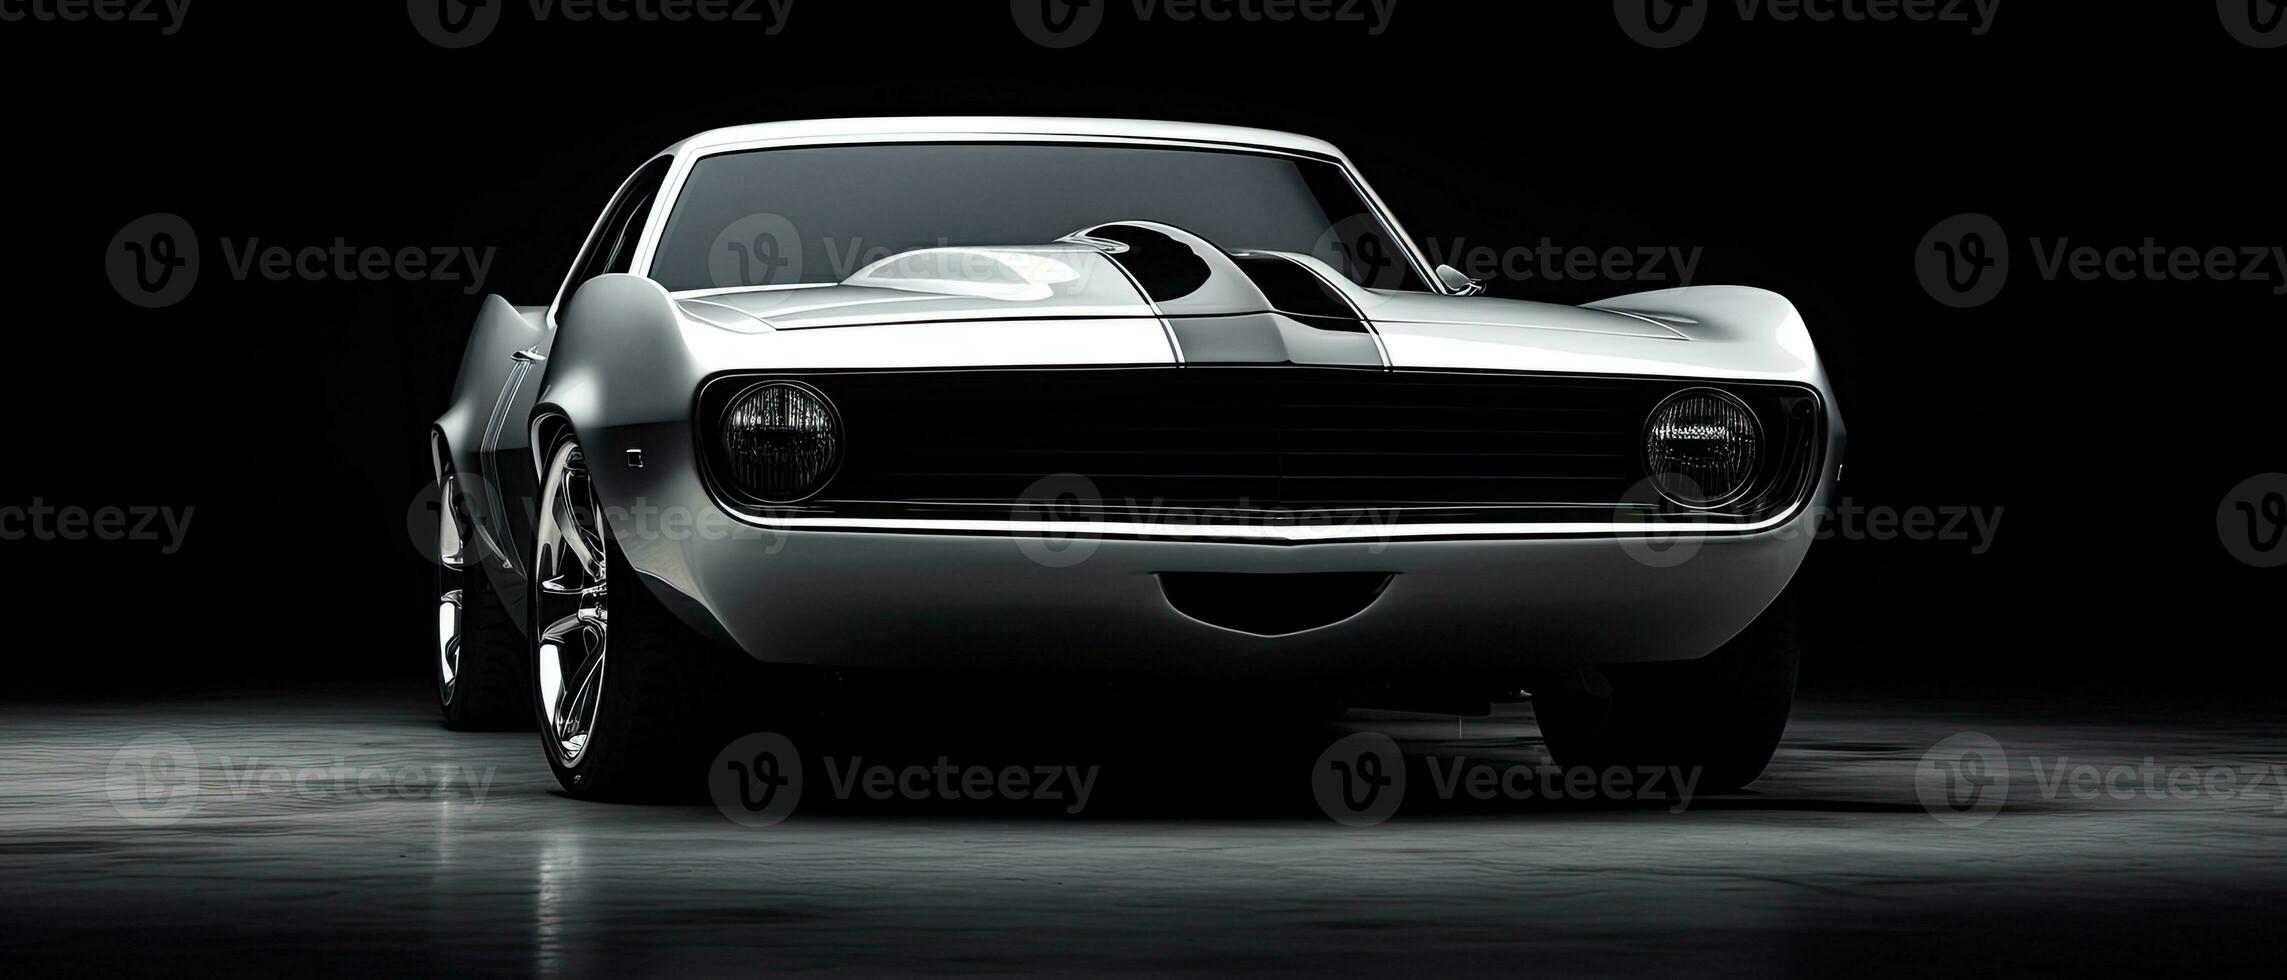 charger photography powerful racing car auto performance show automobile luxury exhibition jdm photo